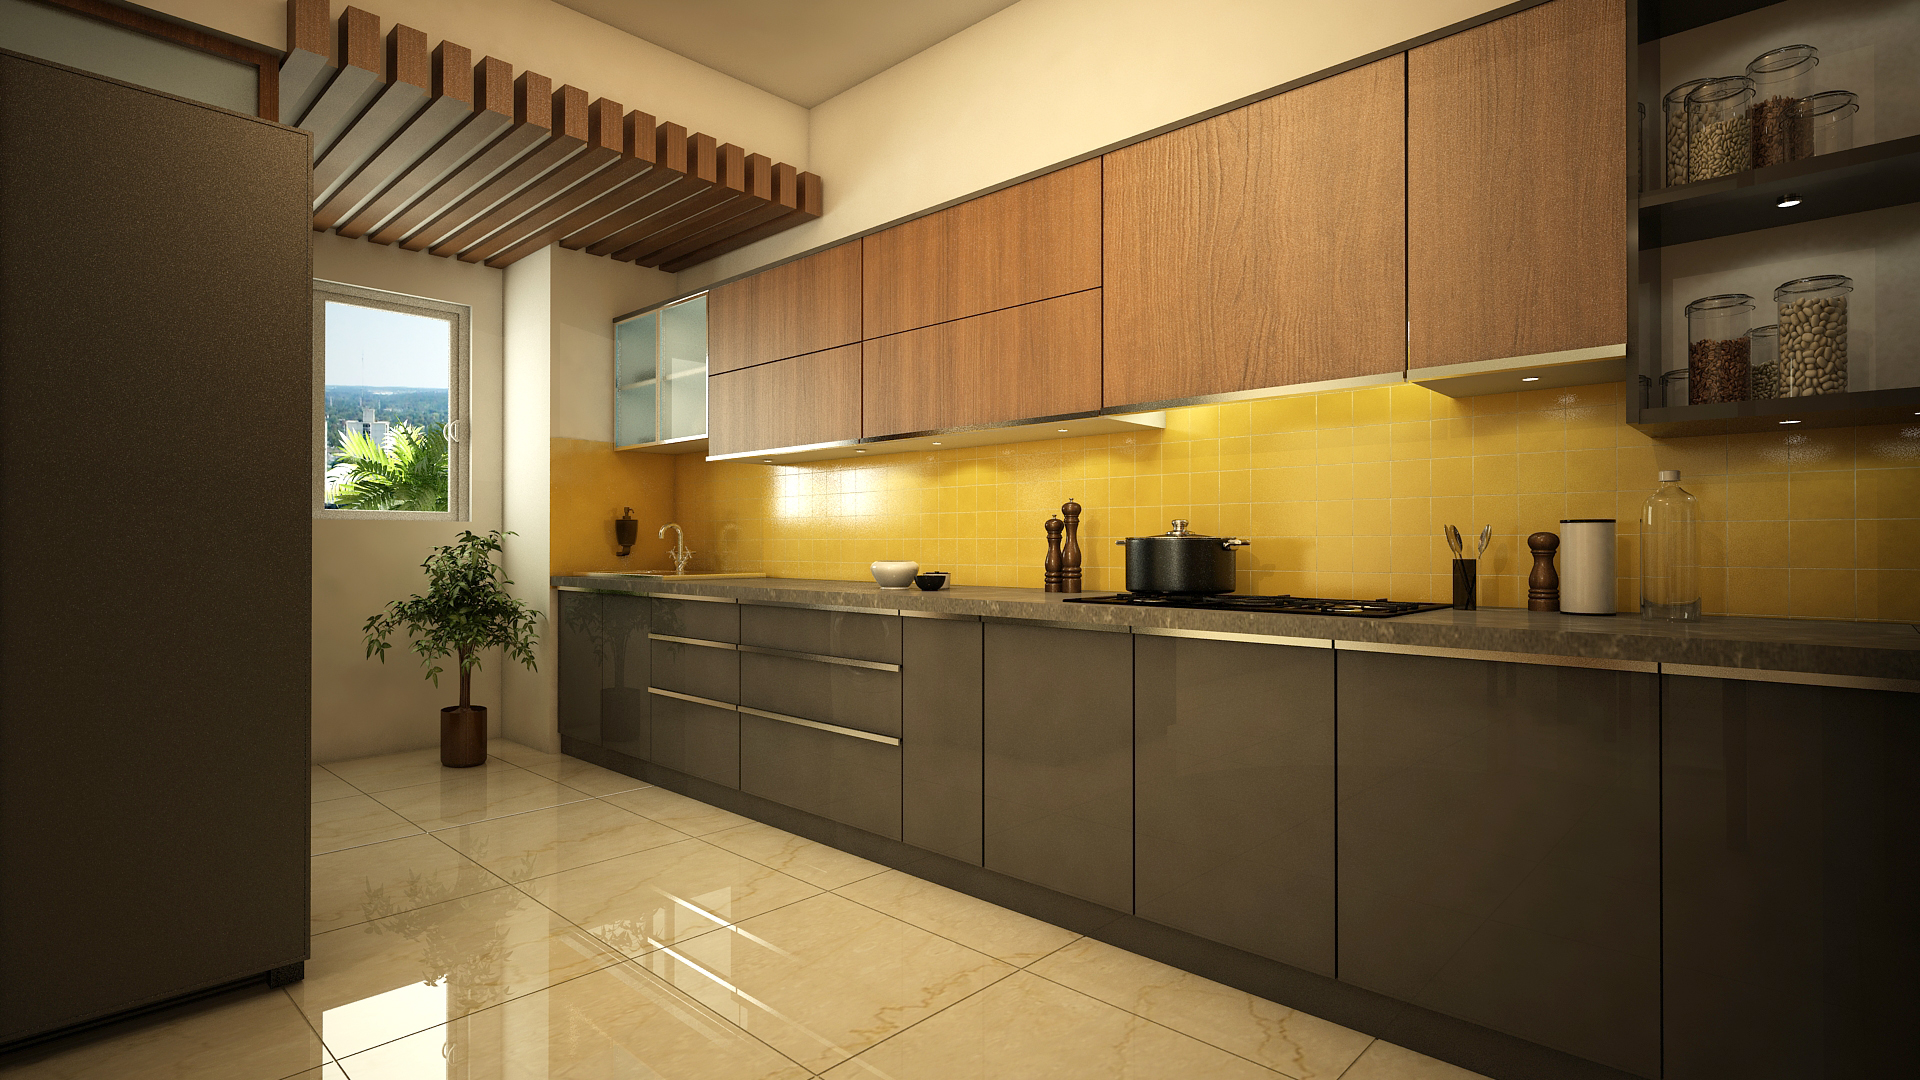 FabModula interior designer products straight modular kitchen with wooden panel